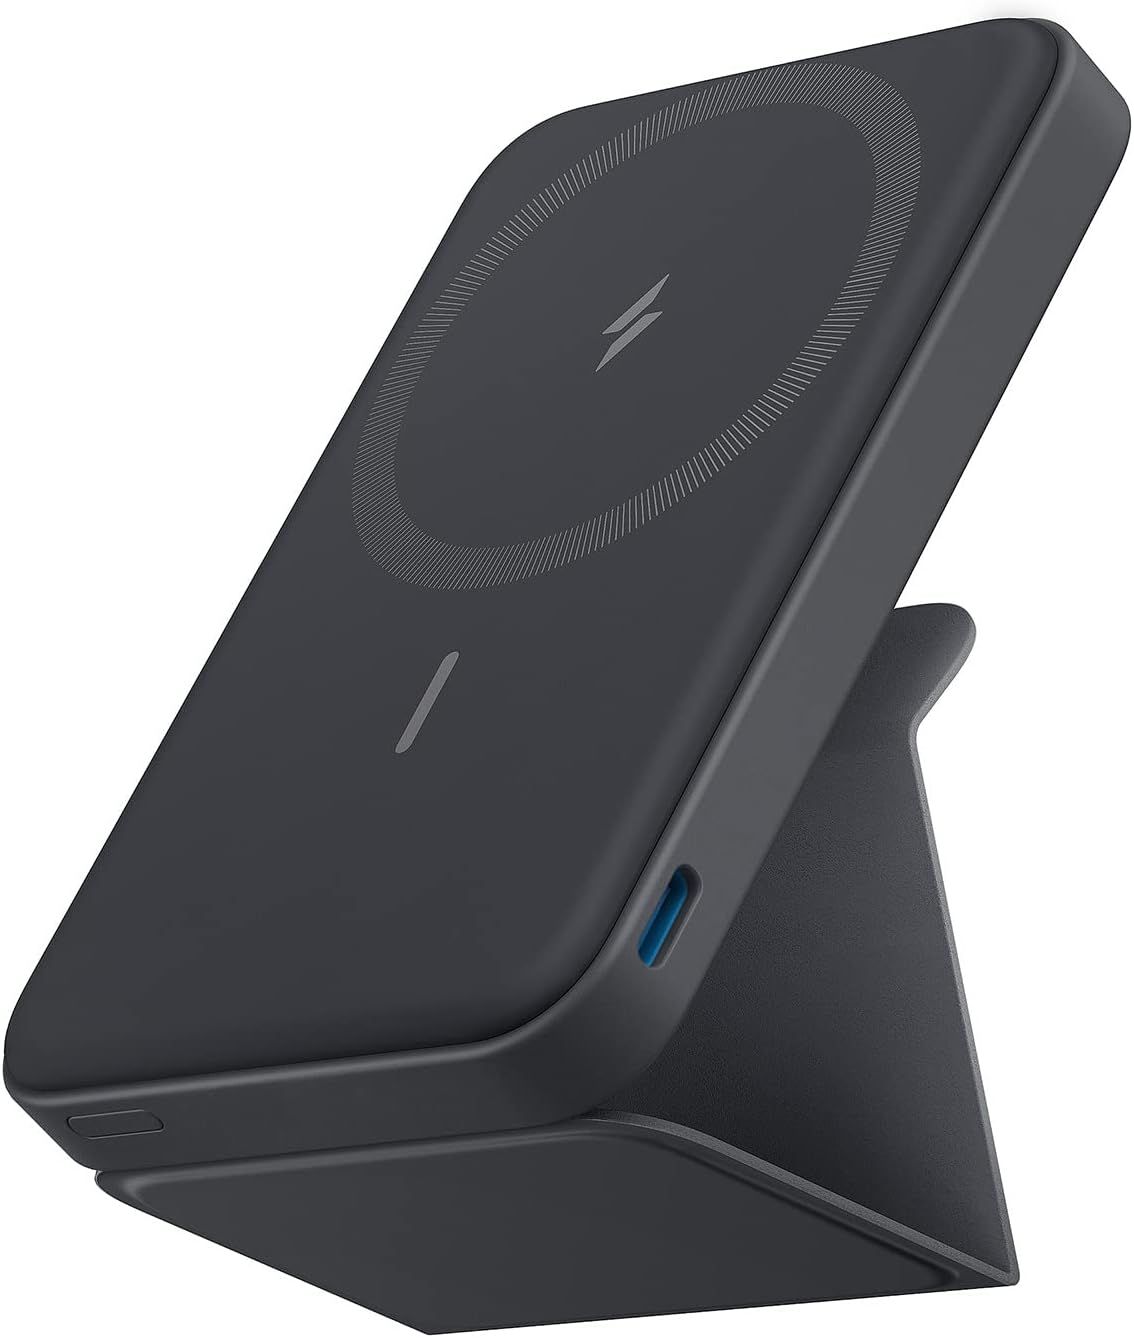 Anker Magnetic Wireless Portable Charger